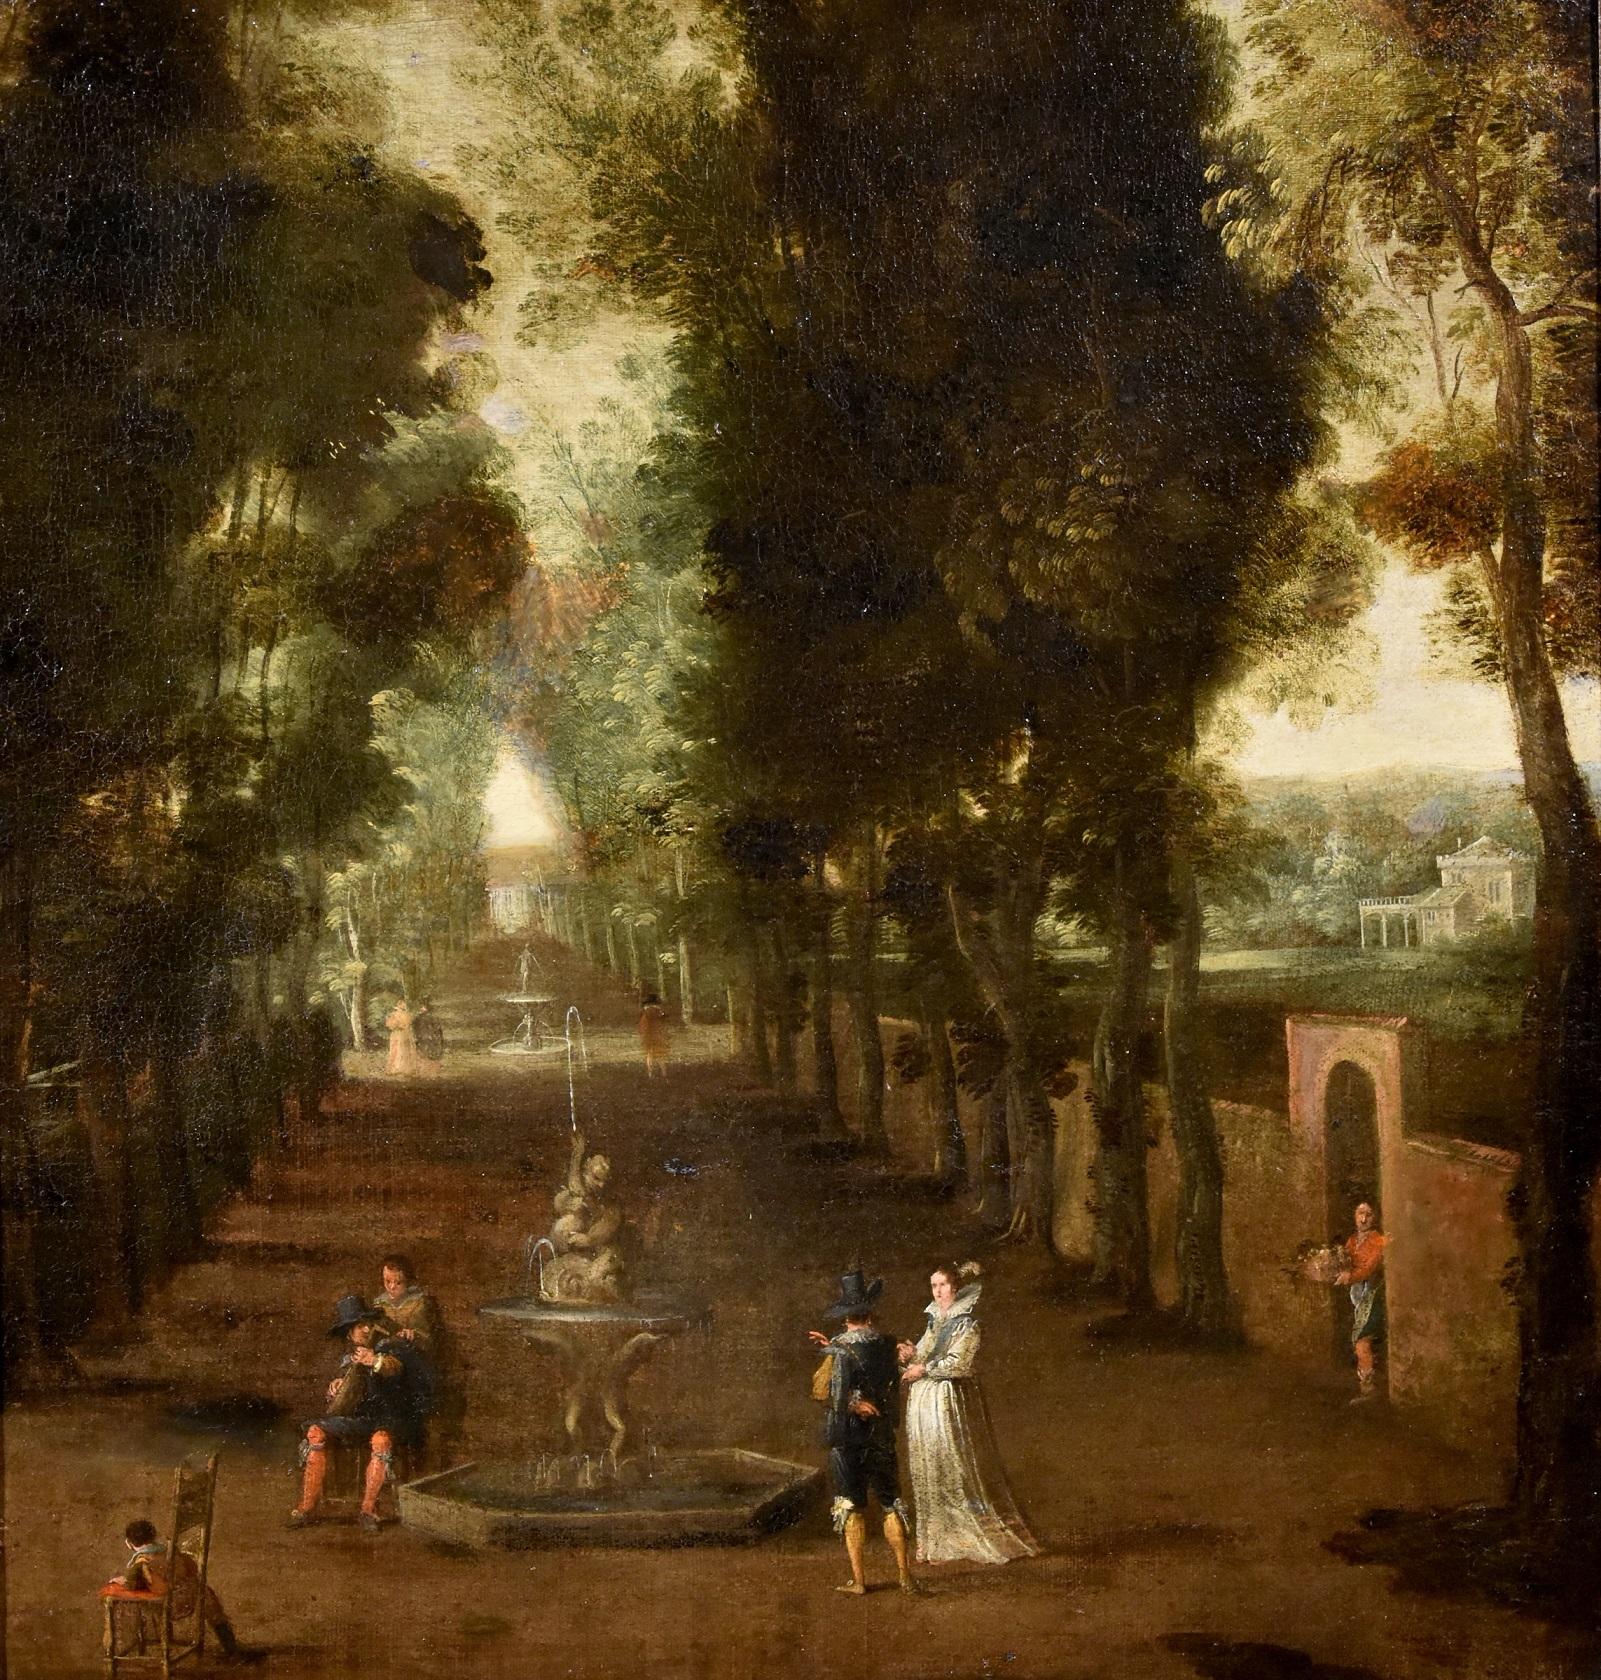 De Moucheron Pair Of Gardens Paint Old master Oil on canvas 17/18th Century Art - Old Masters Painting by Isaac de Moucheron (Amsterdam 1667 - 1744)